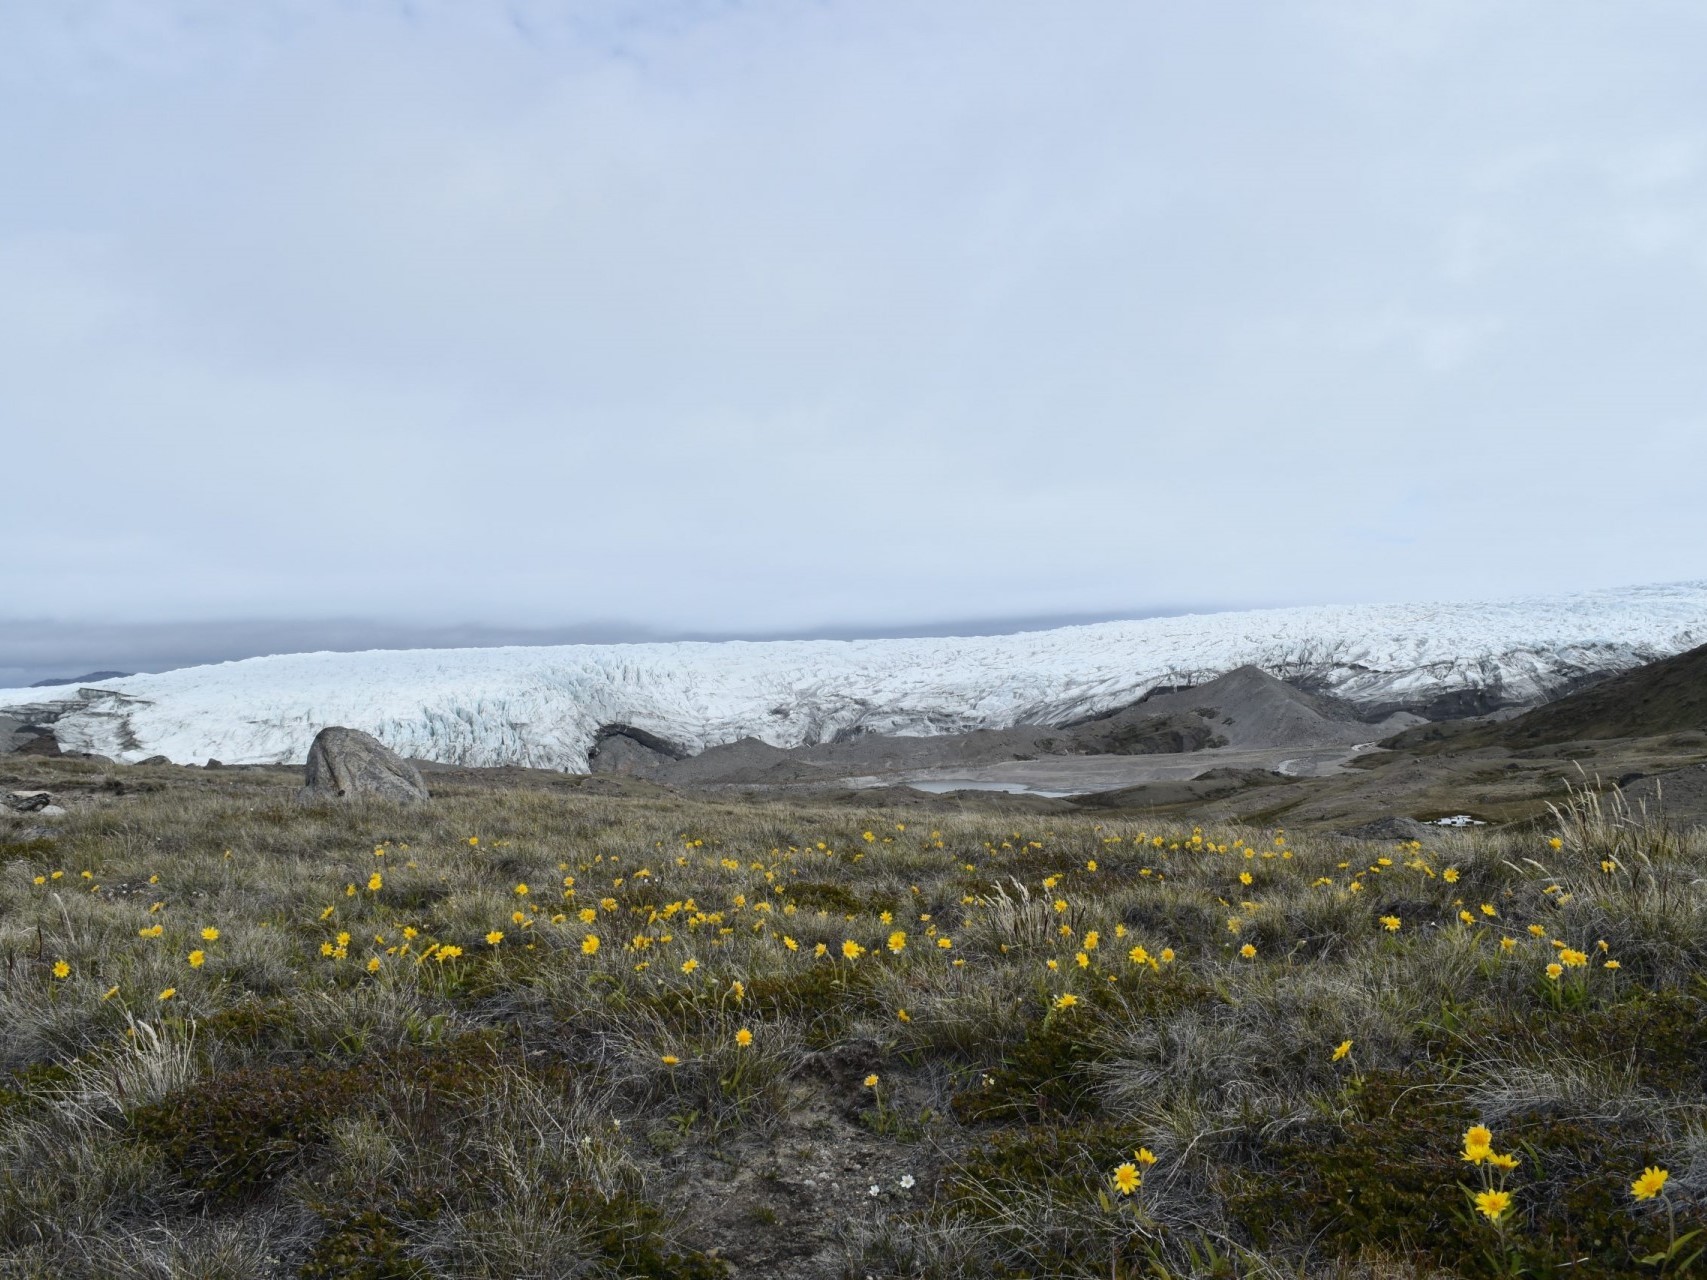 Arctic permafrost holds vast amounts of carbon that could be released as the world warms. Here, tundra near the Greenland ice sheet in summer. Credit: Kevin Krajick